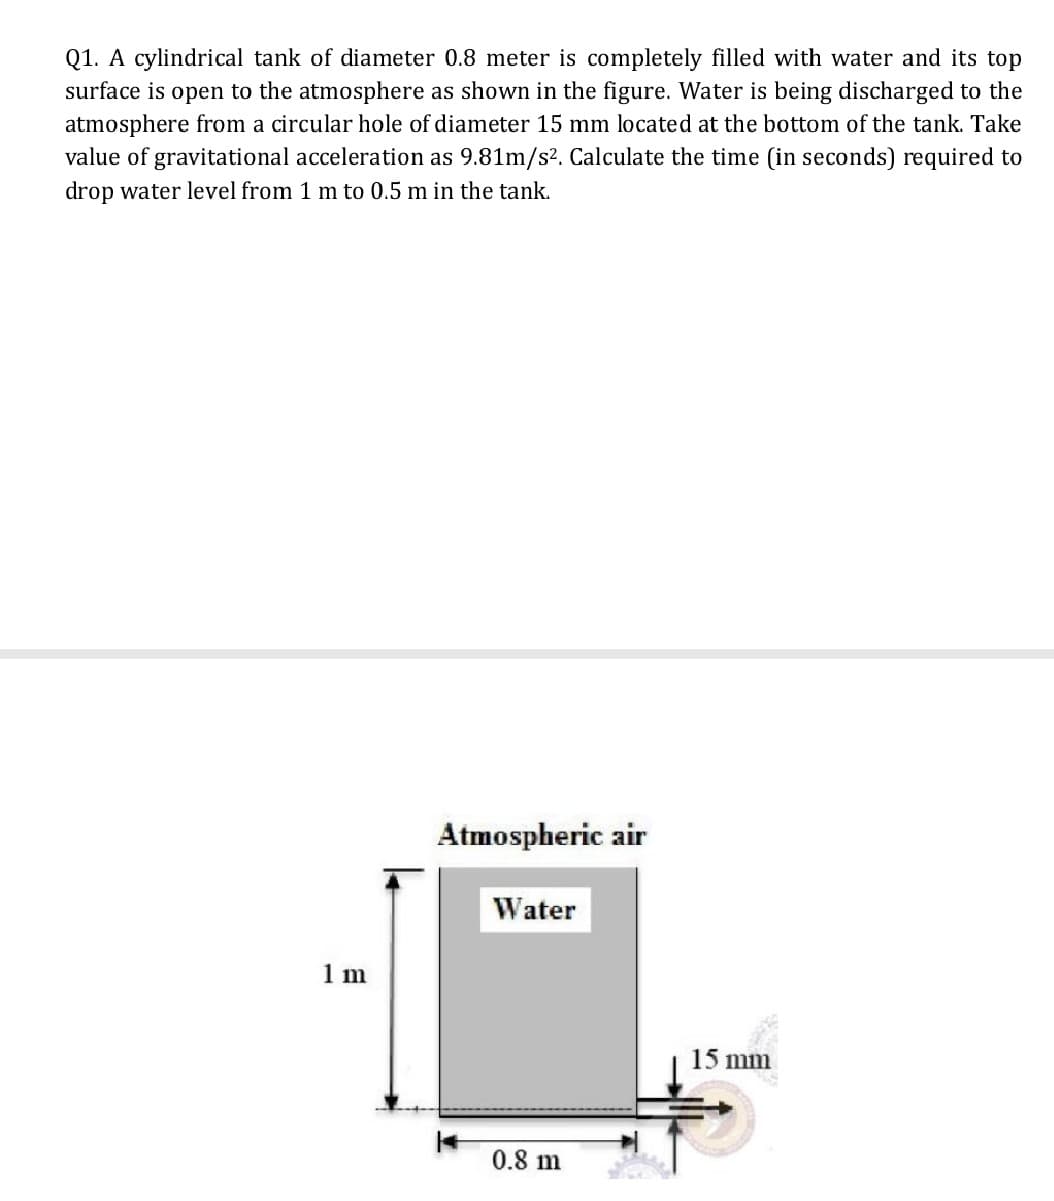 Q1. A cylindrical tank of diameter 0.8 meter is completely filled with water and its top
surface is open to the atmosphere as shown in the figure. Water is being discharged to the
atmosphere from a circular hole of diameter 15 mm located at the bottom of the tank. Take
value of gravitational acceleration as 9.81m/s². Calculate the time (in seconds) required to
drop water level from 1 m to 0.5 m in the tank.
